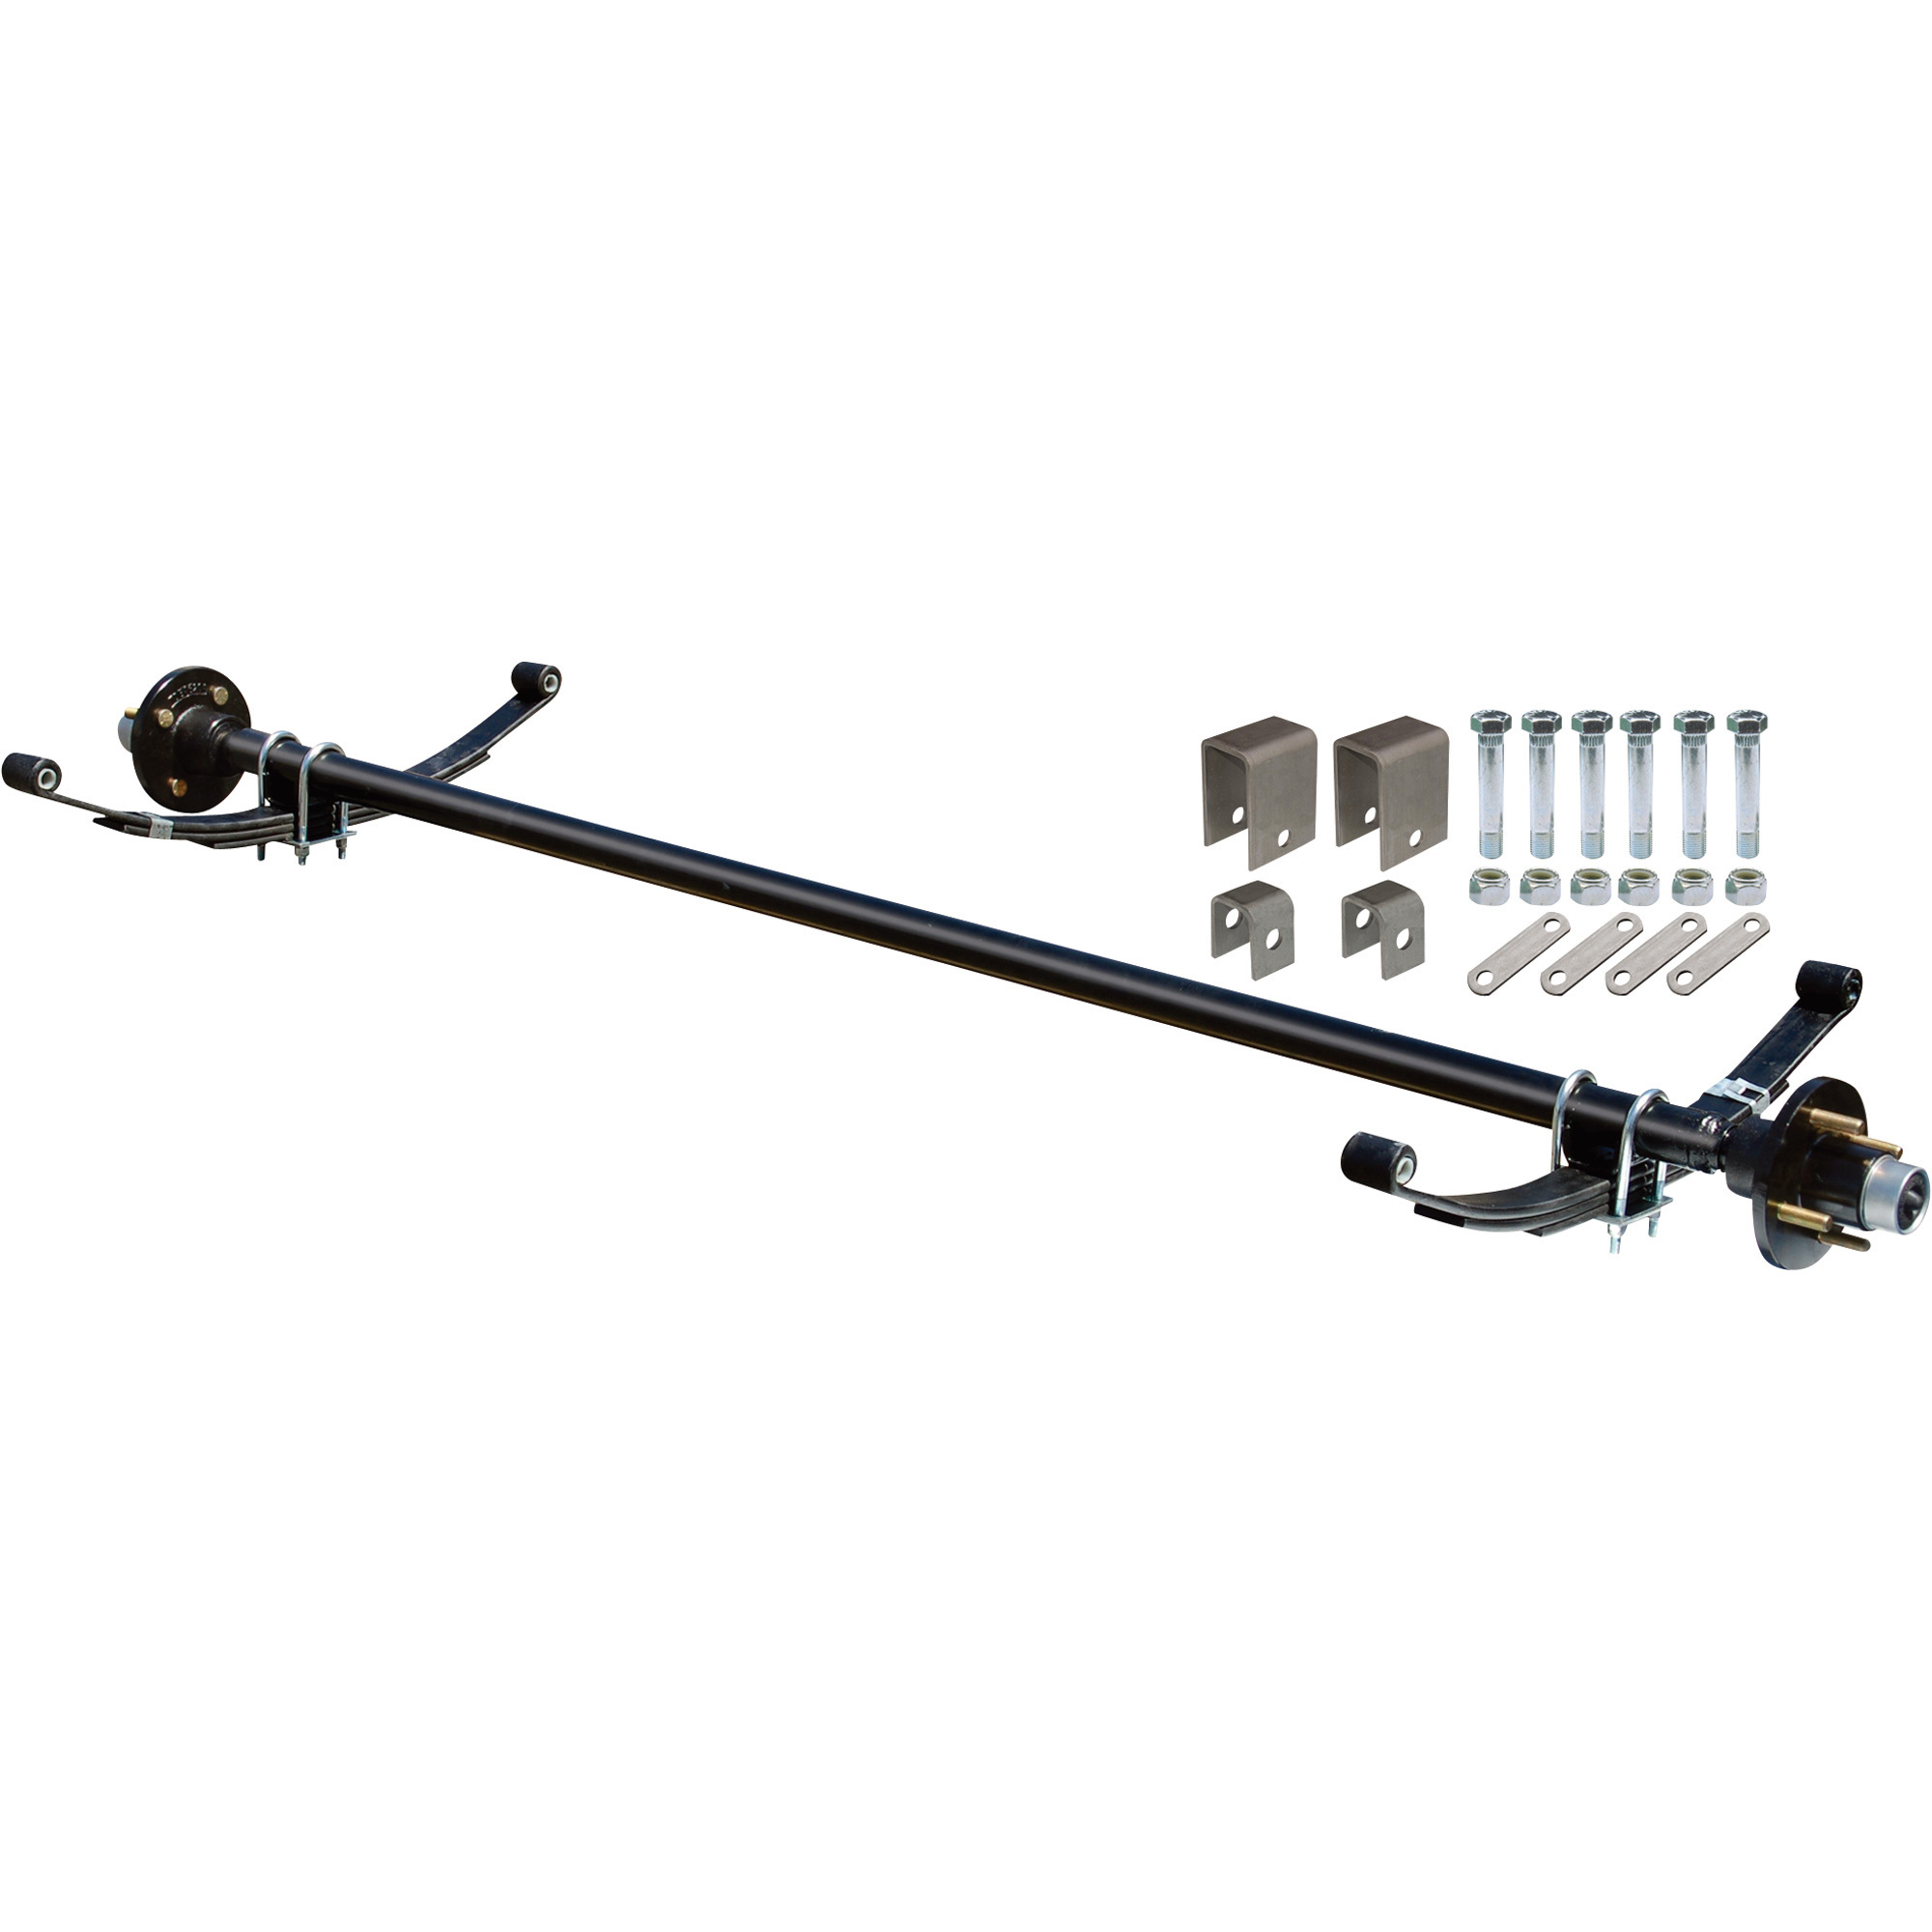 Ultra-Tow 2000-Lb. Capacity Complete Axle Kit, 67Inch Hubface, 55Inch Spring Center, 4-Bolt Pattern, 4Inch Hubs